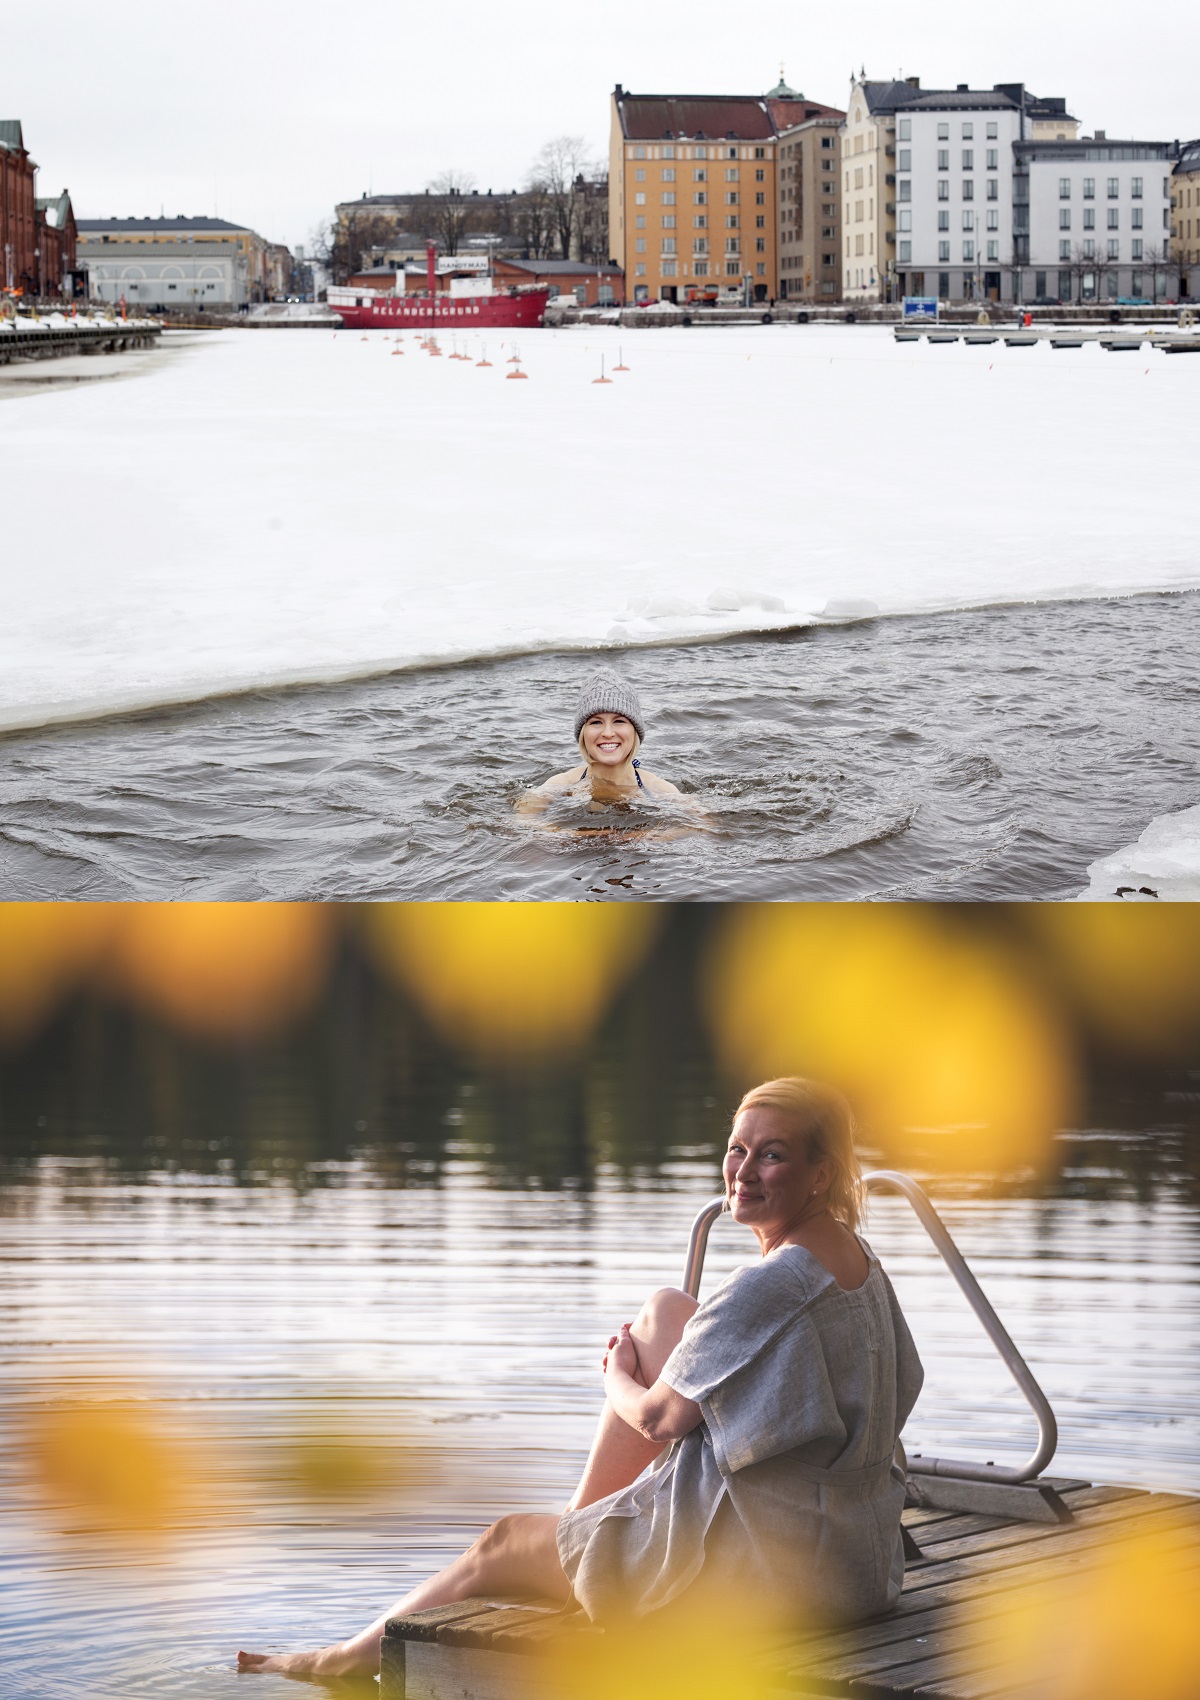 Hot and Cold. From Sauna to Sea: The Finnish Way to a Happy, Healthy Life